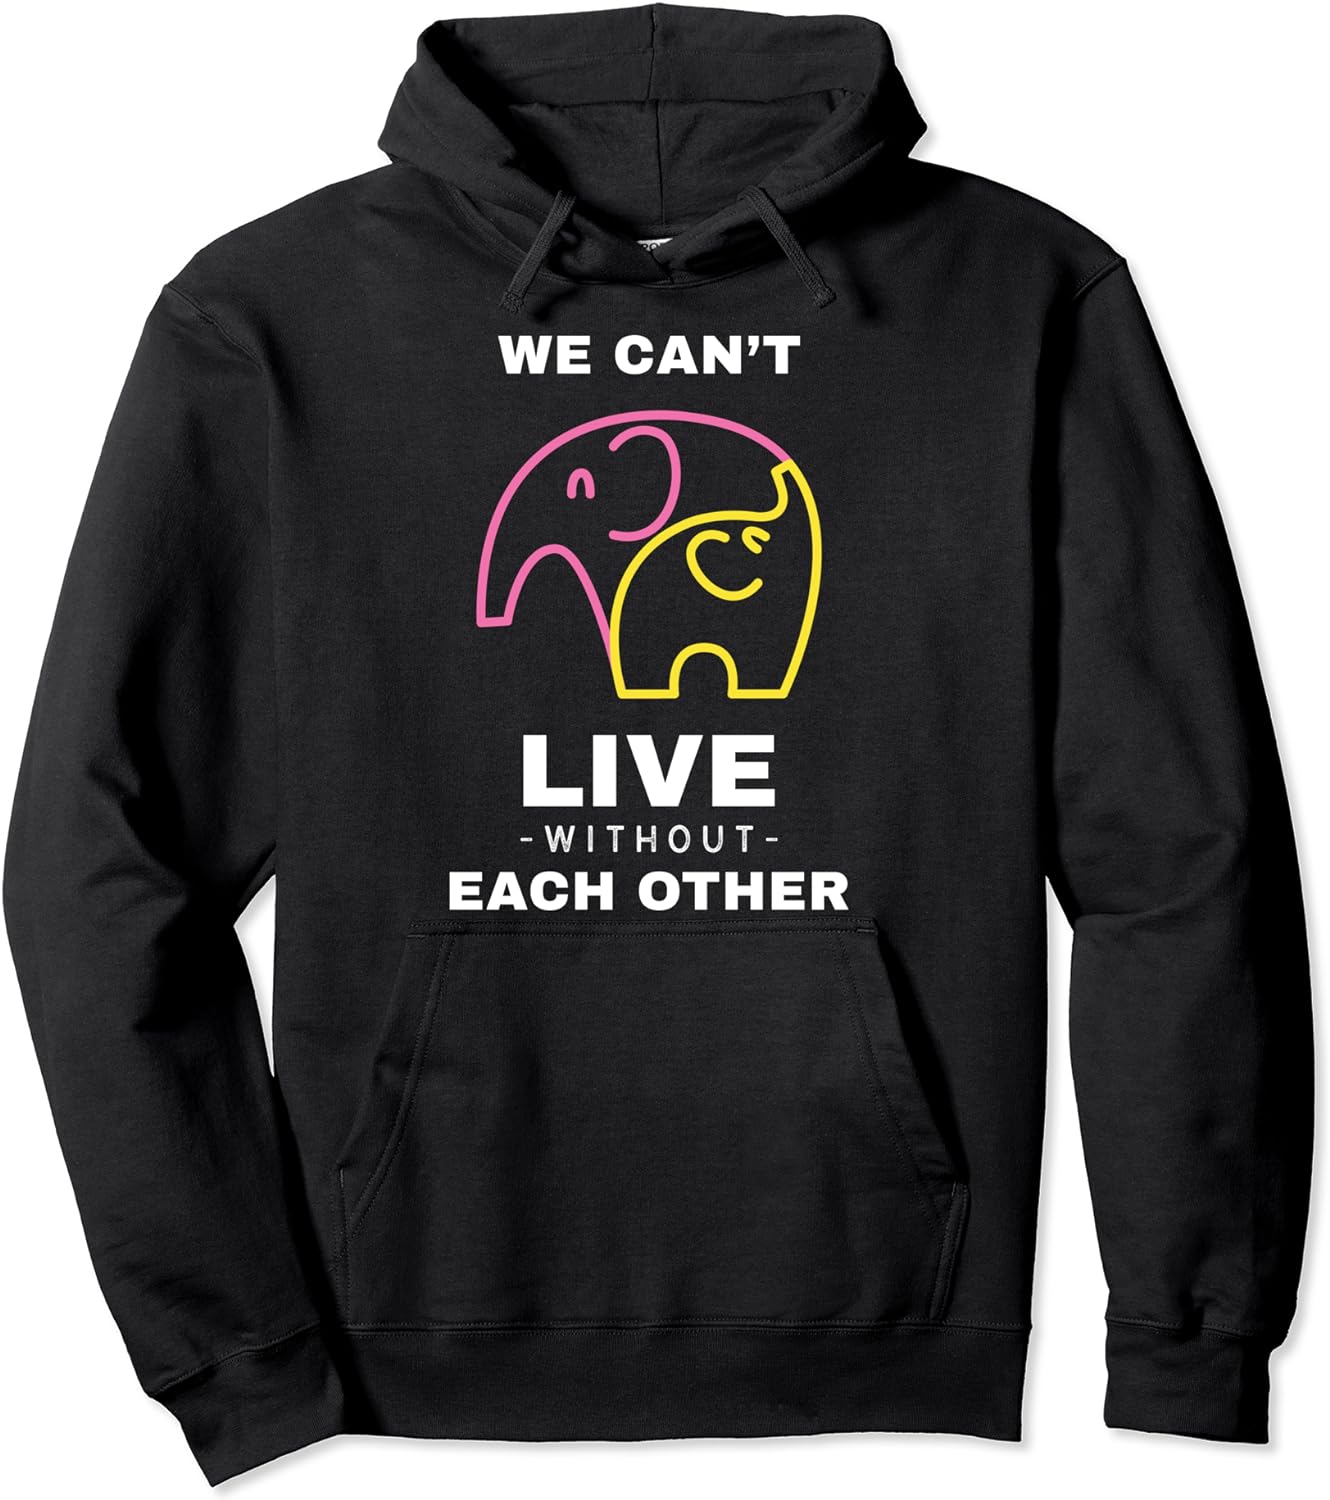 We Can’t Live Without Each Other Hoodie